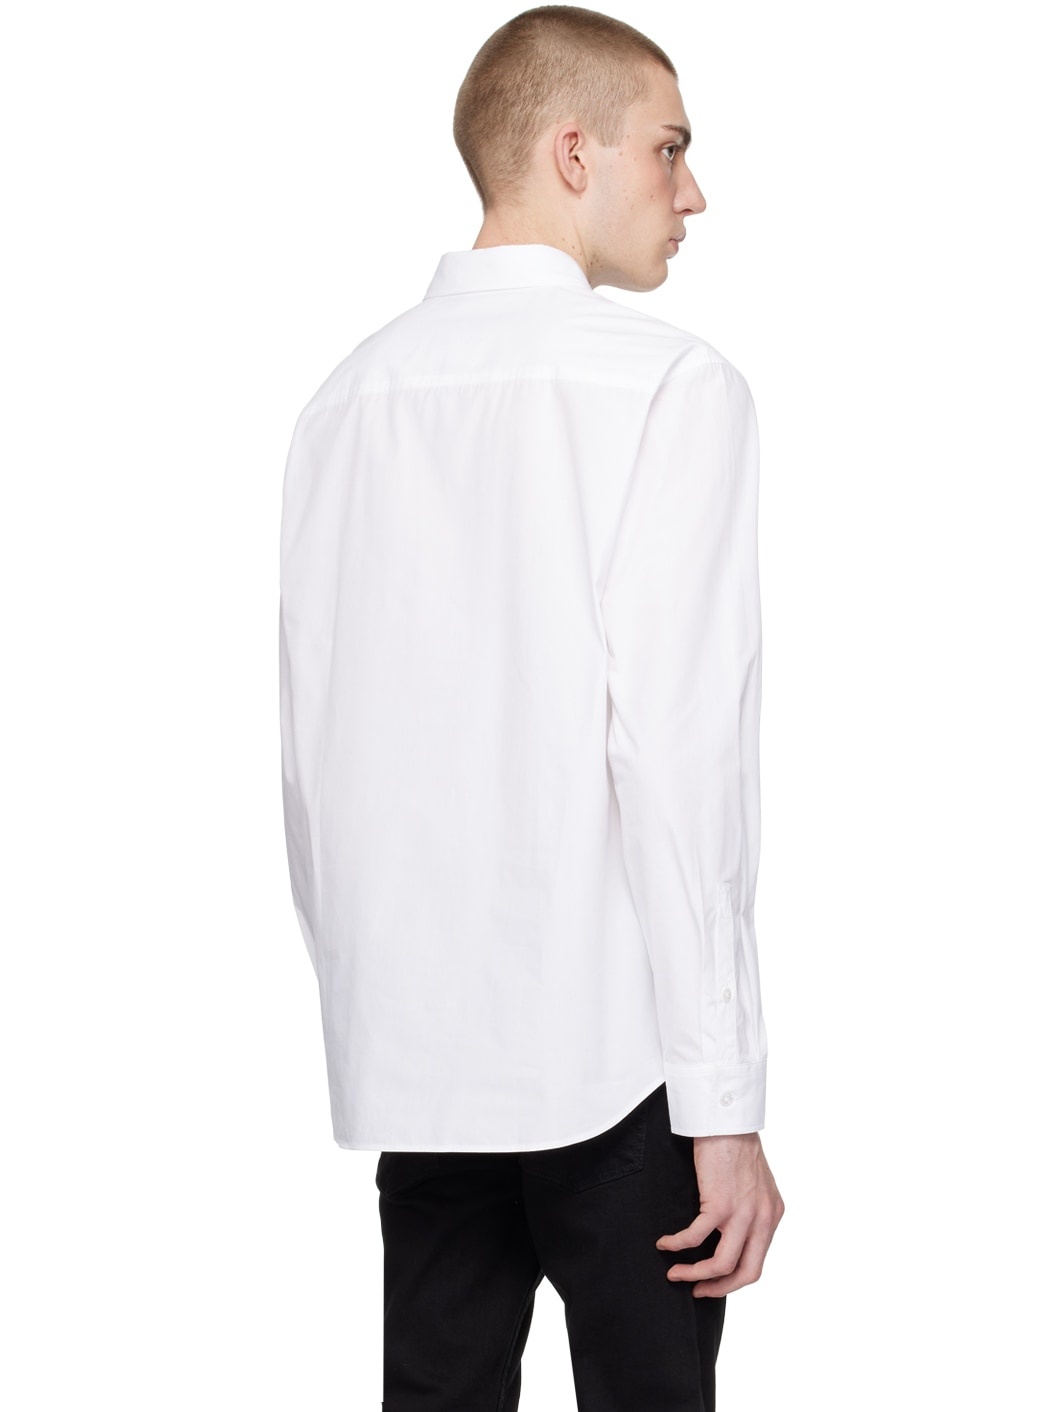 White Piece Number Shirt - 3